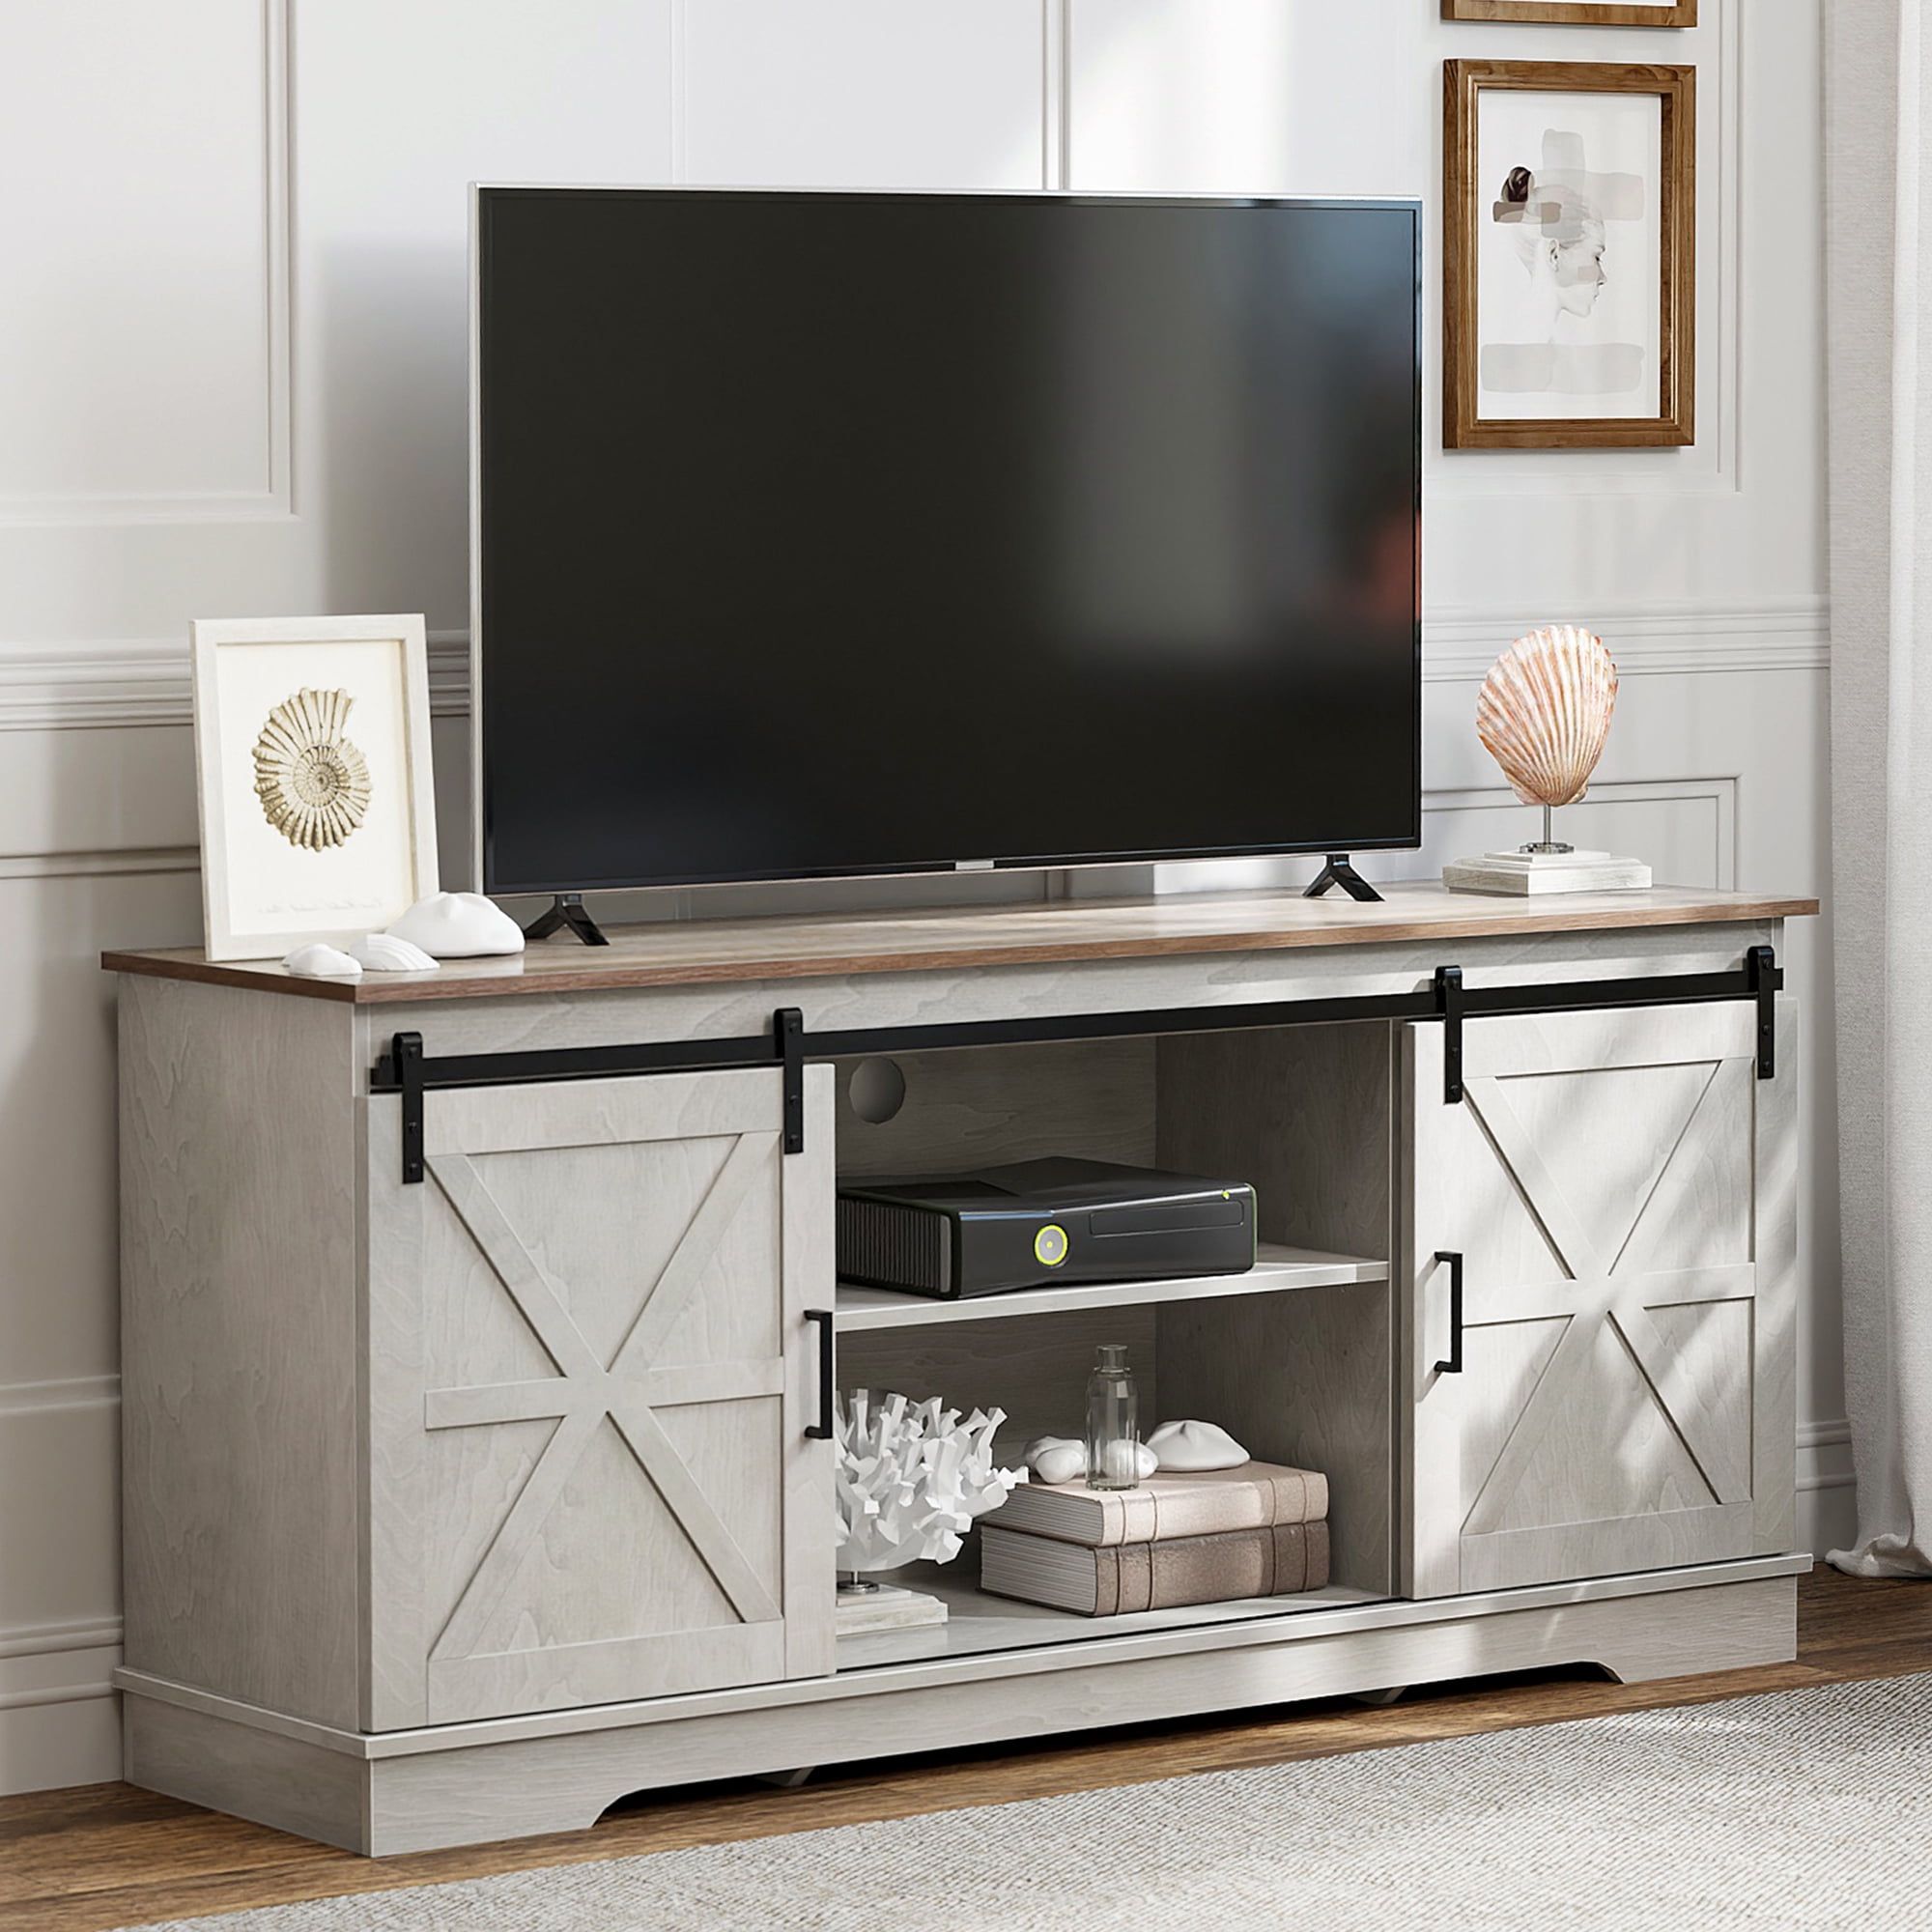 Dextrus Farmhouse Tv Stand For 65 Inch Tv, Entertainment Center For 300lbs  With Double Barn Doors, Tv Media Console, Grey Wash – Walmart Intended For Farmhouse Media Entertainment Centers (Photo 9 of 15)